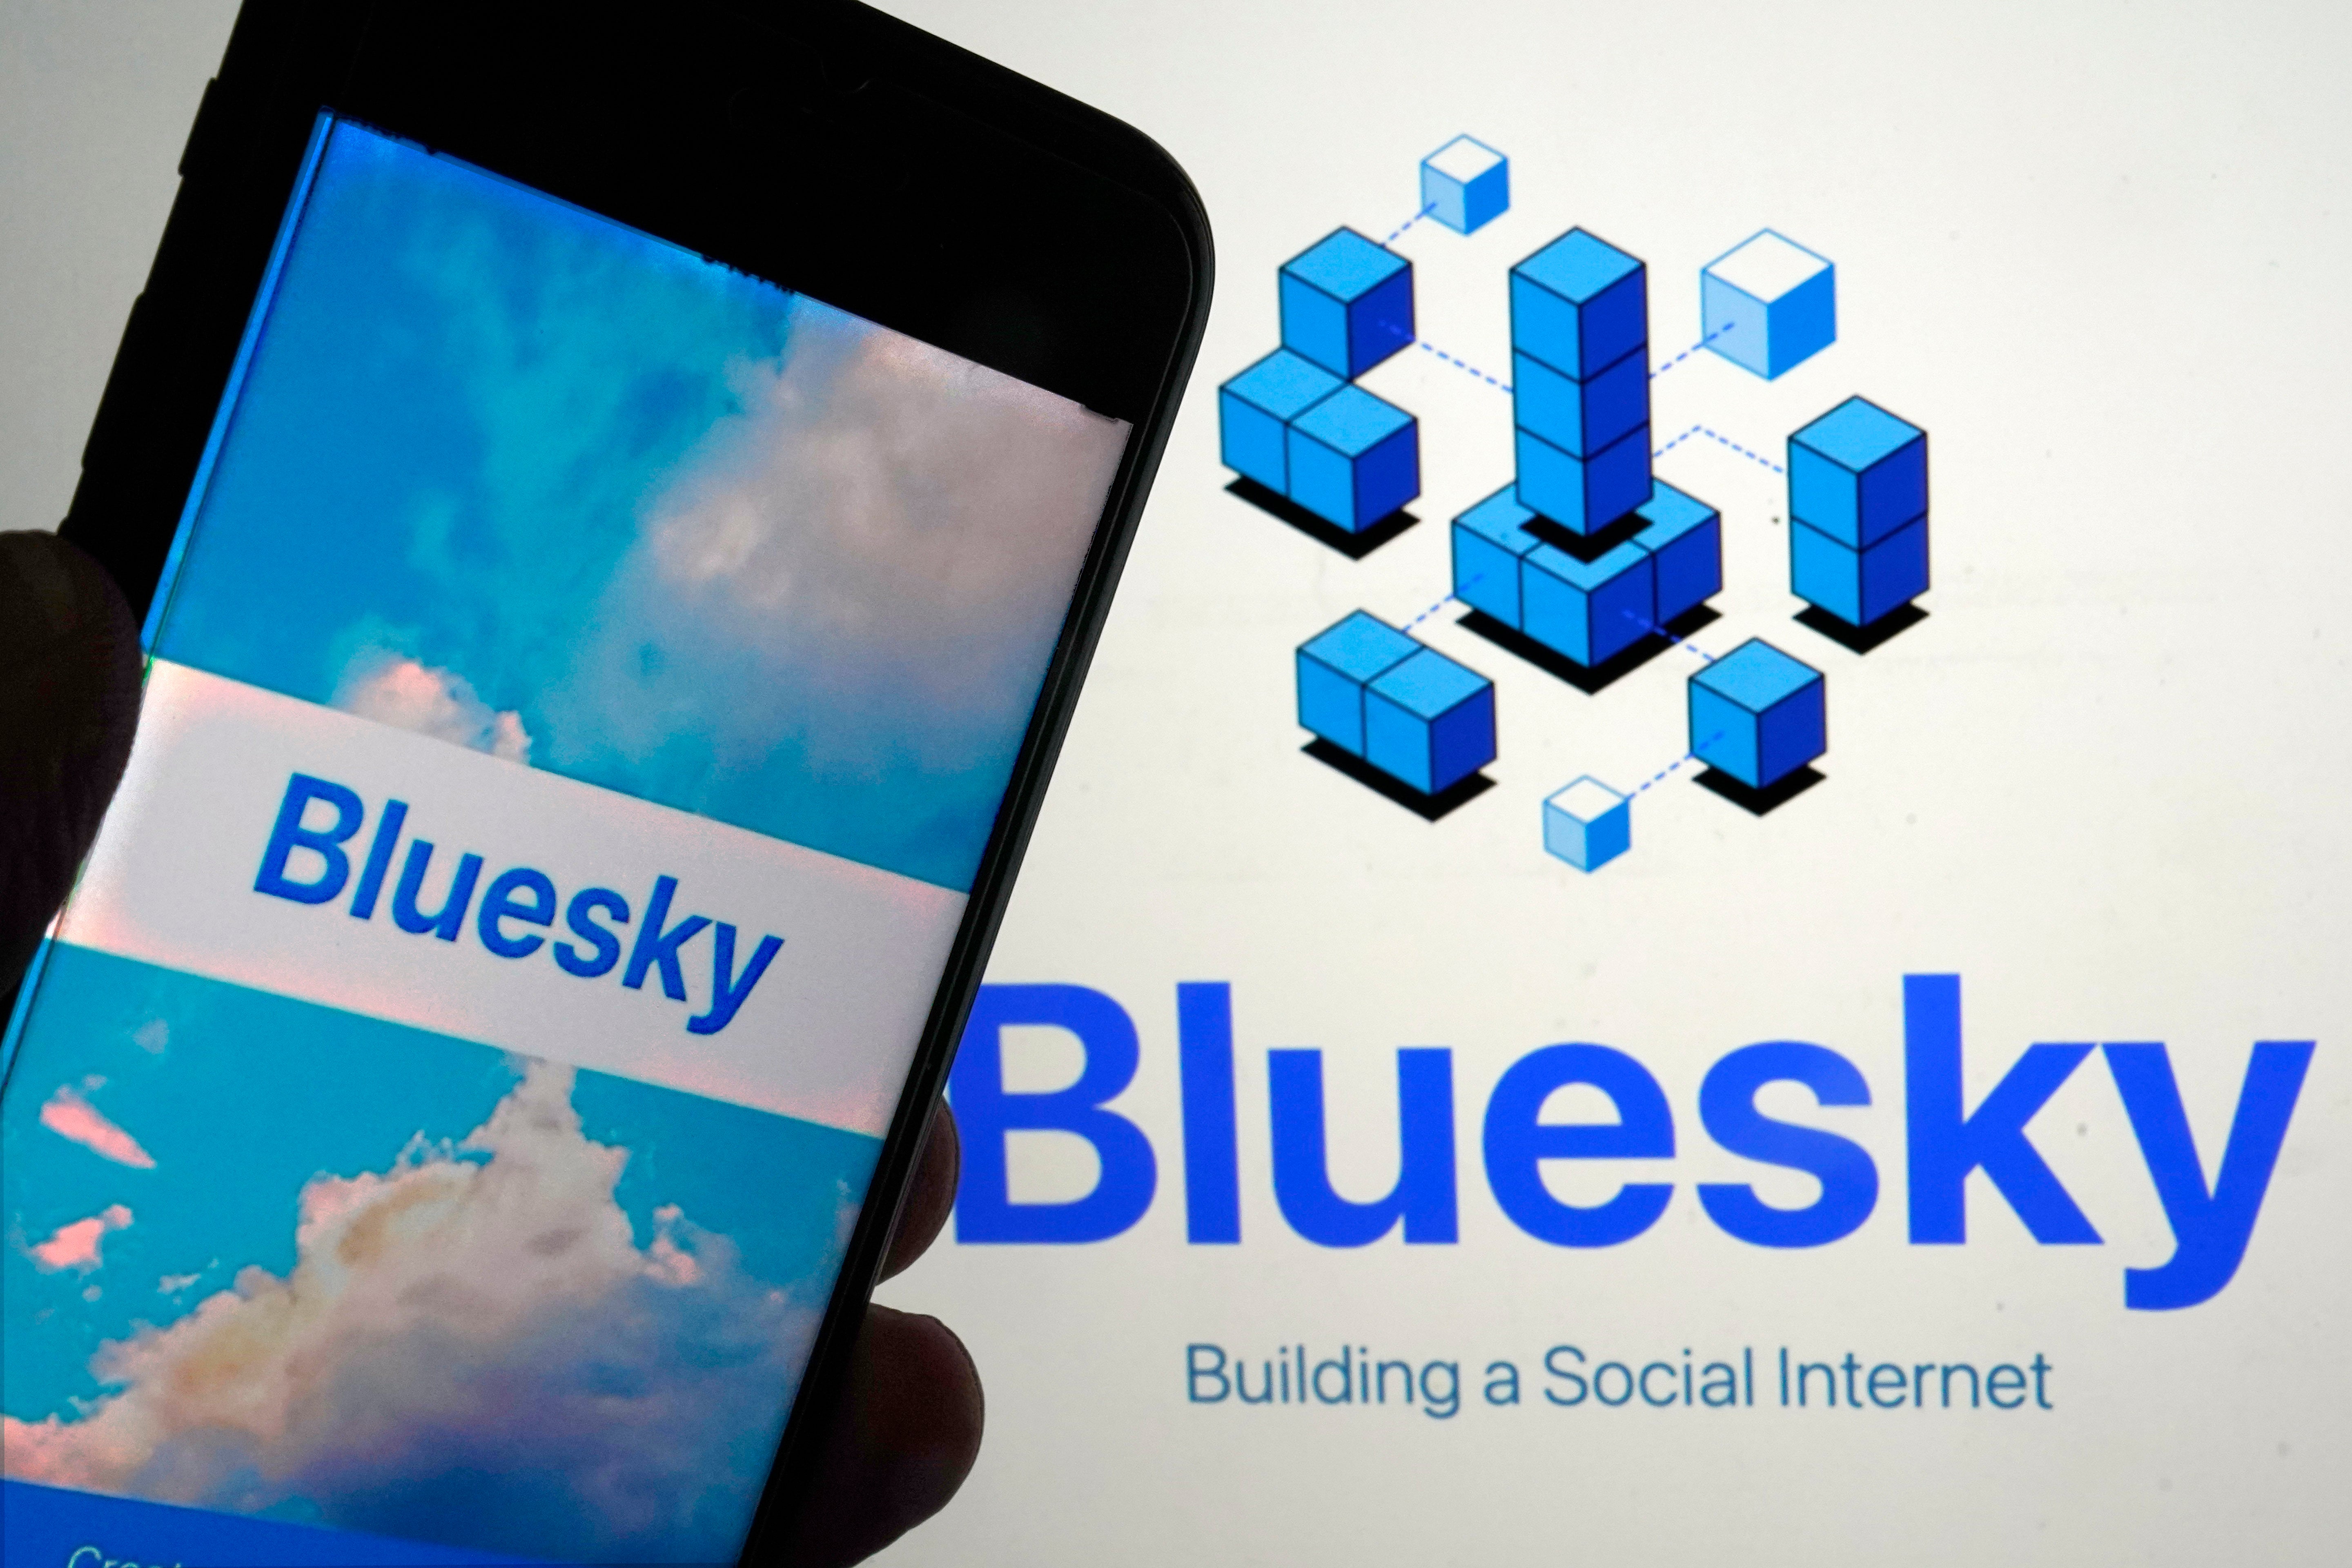 The decentralised Bluesky app was created by Twitter founder Jack Dorsey